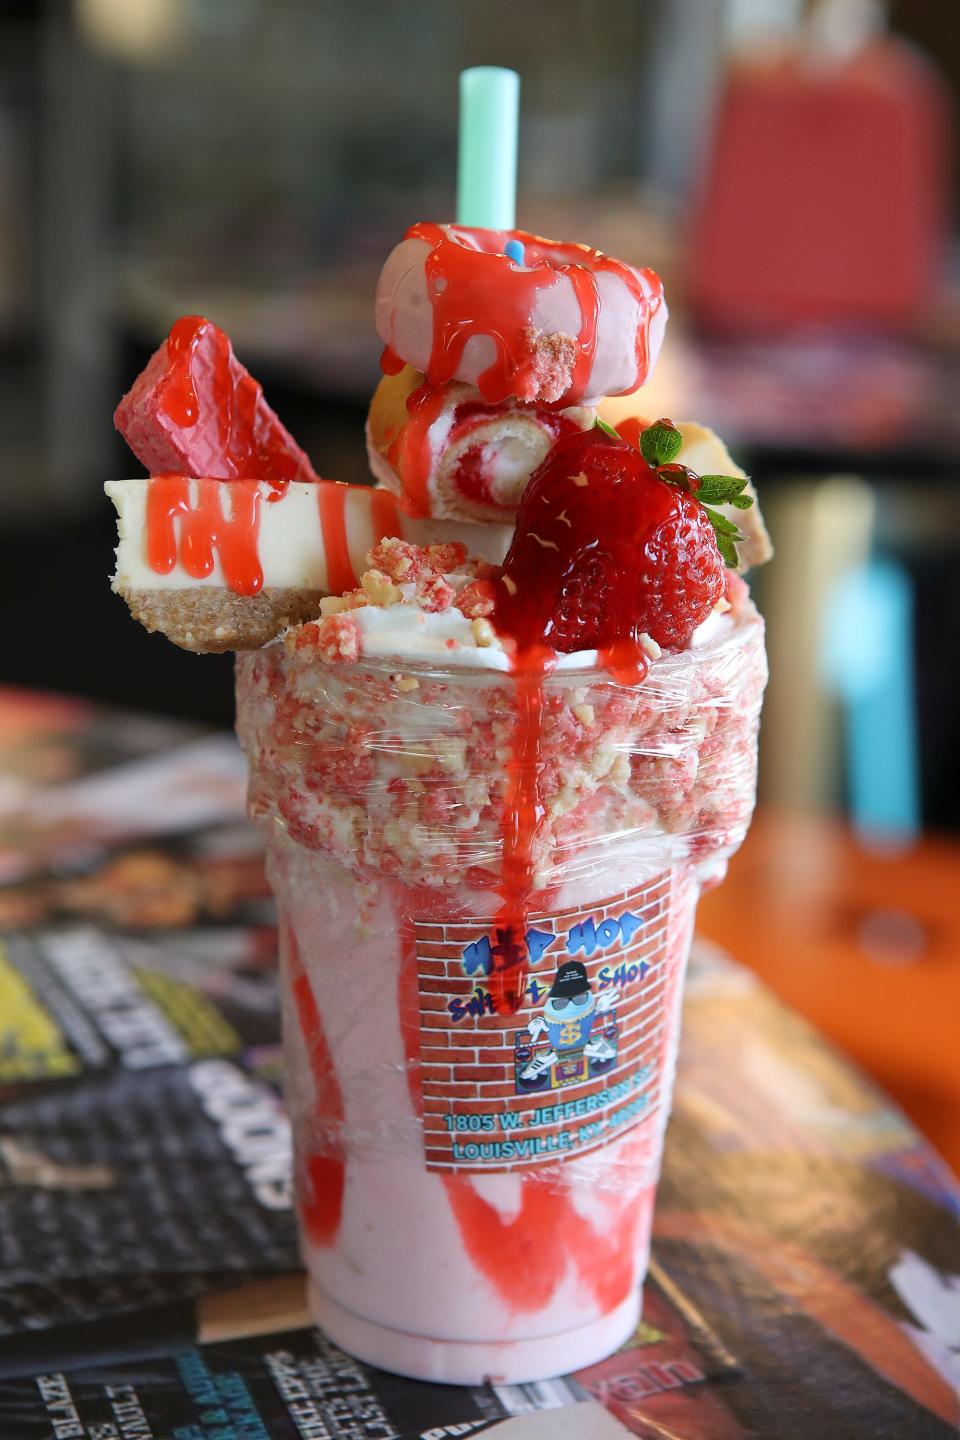 One of the specialties at the Hip Hop Sweet Shop, a strawberry cheesecake milkshake.